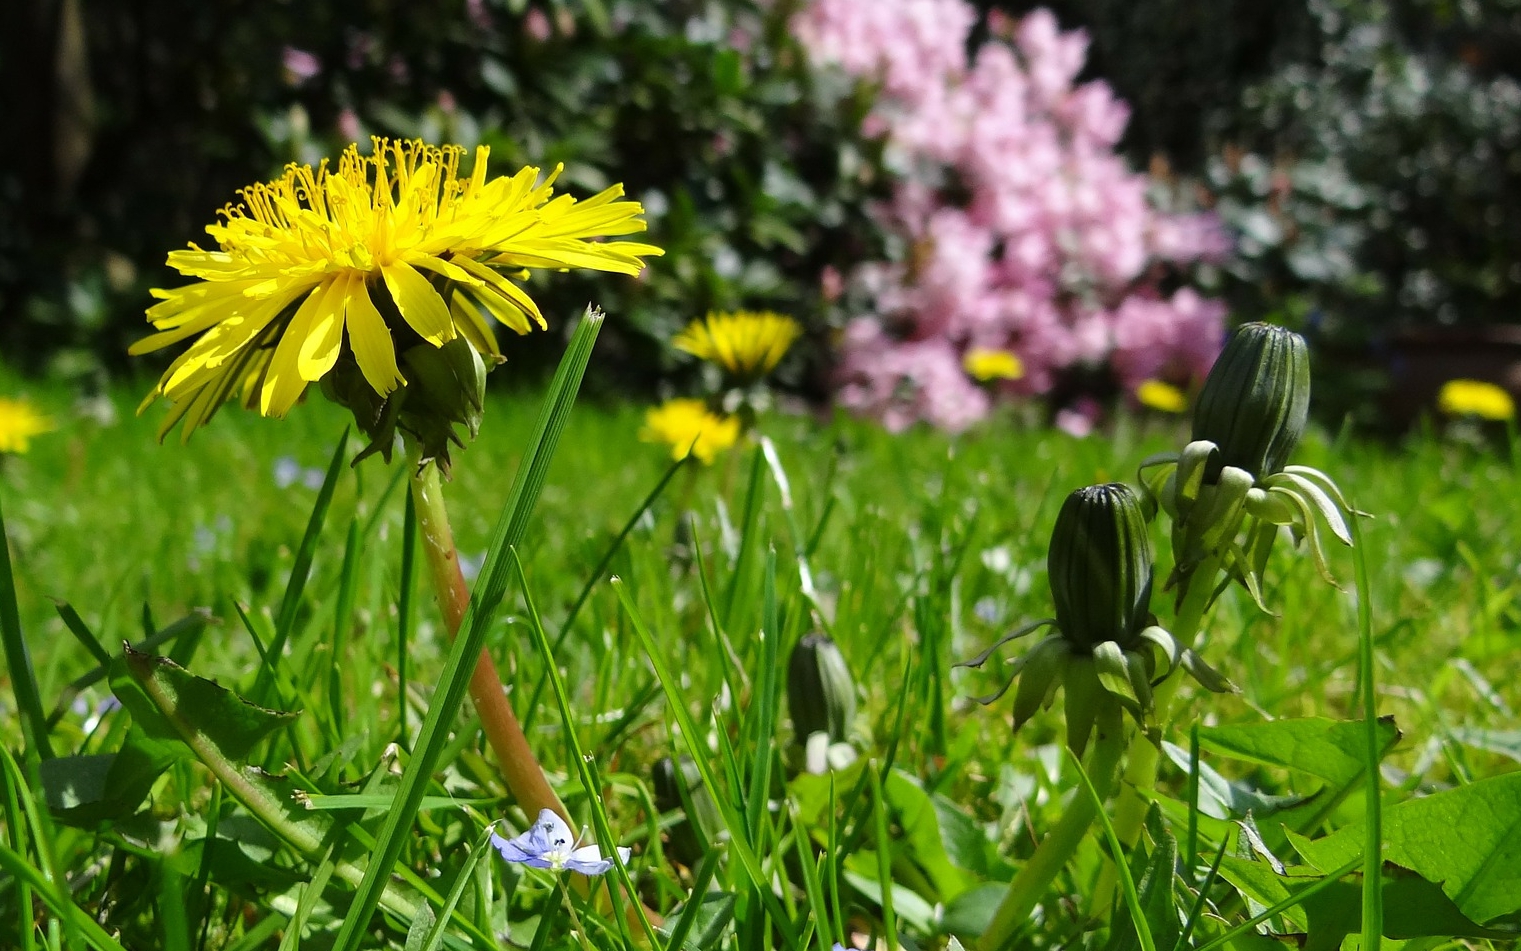 Dandelions for Food, Drink, and Medicine | The Old Farmer's Almanac